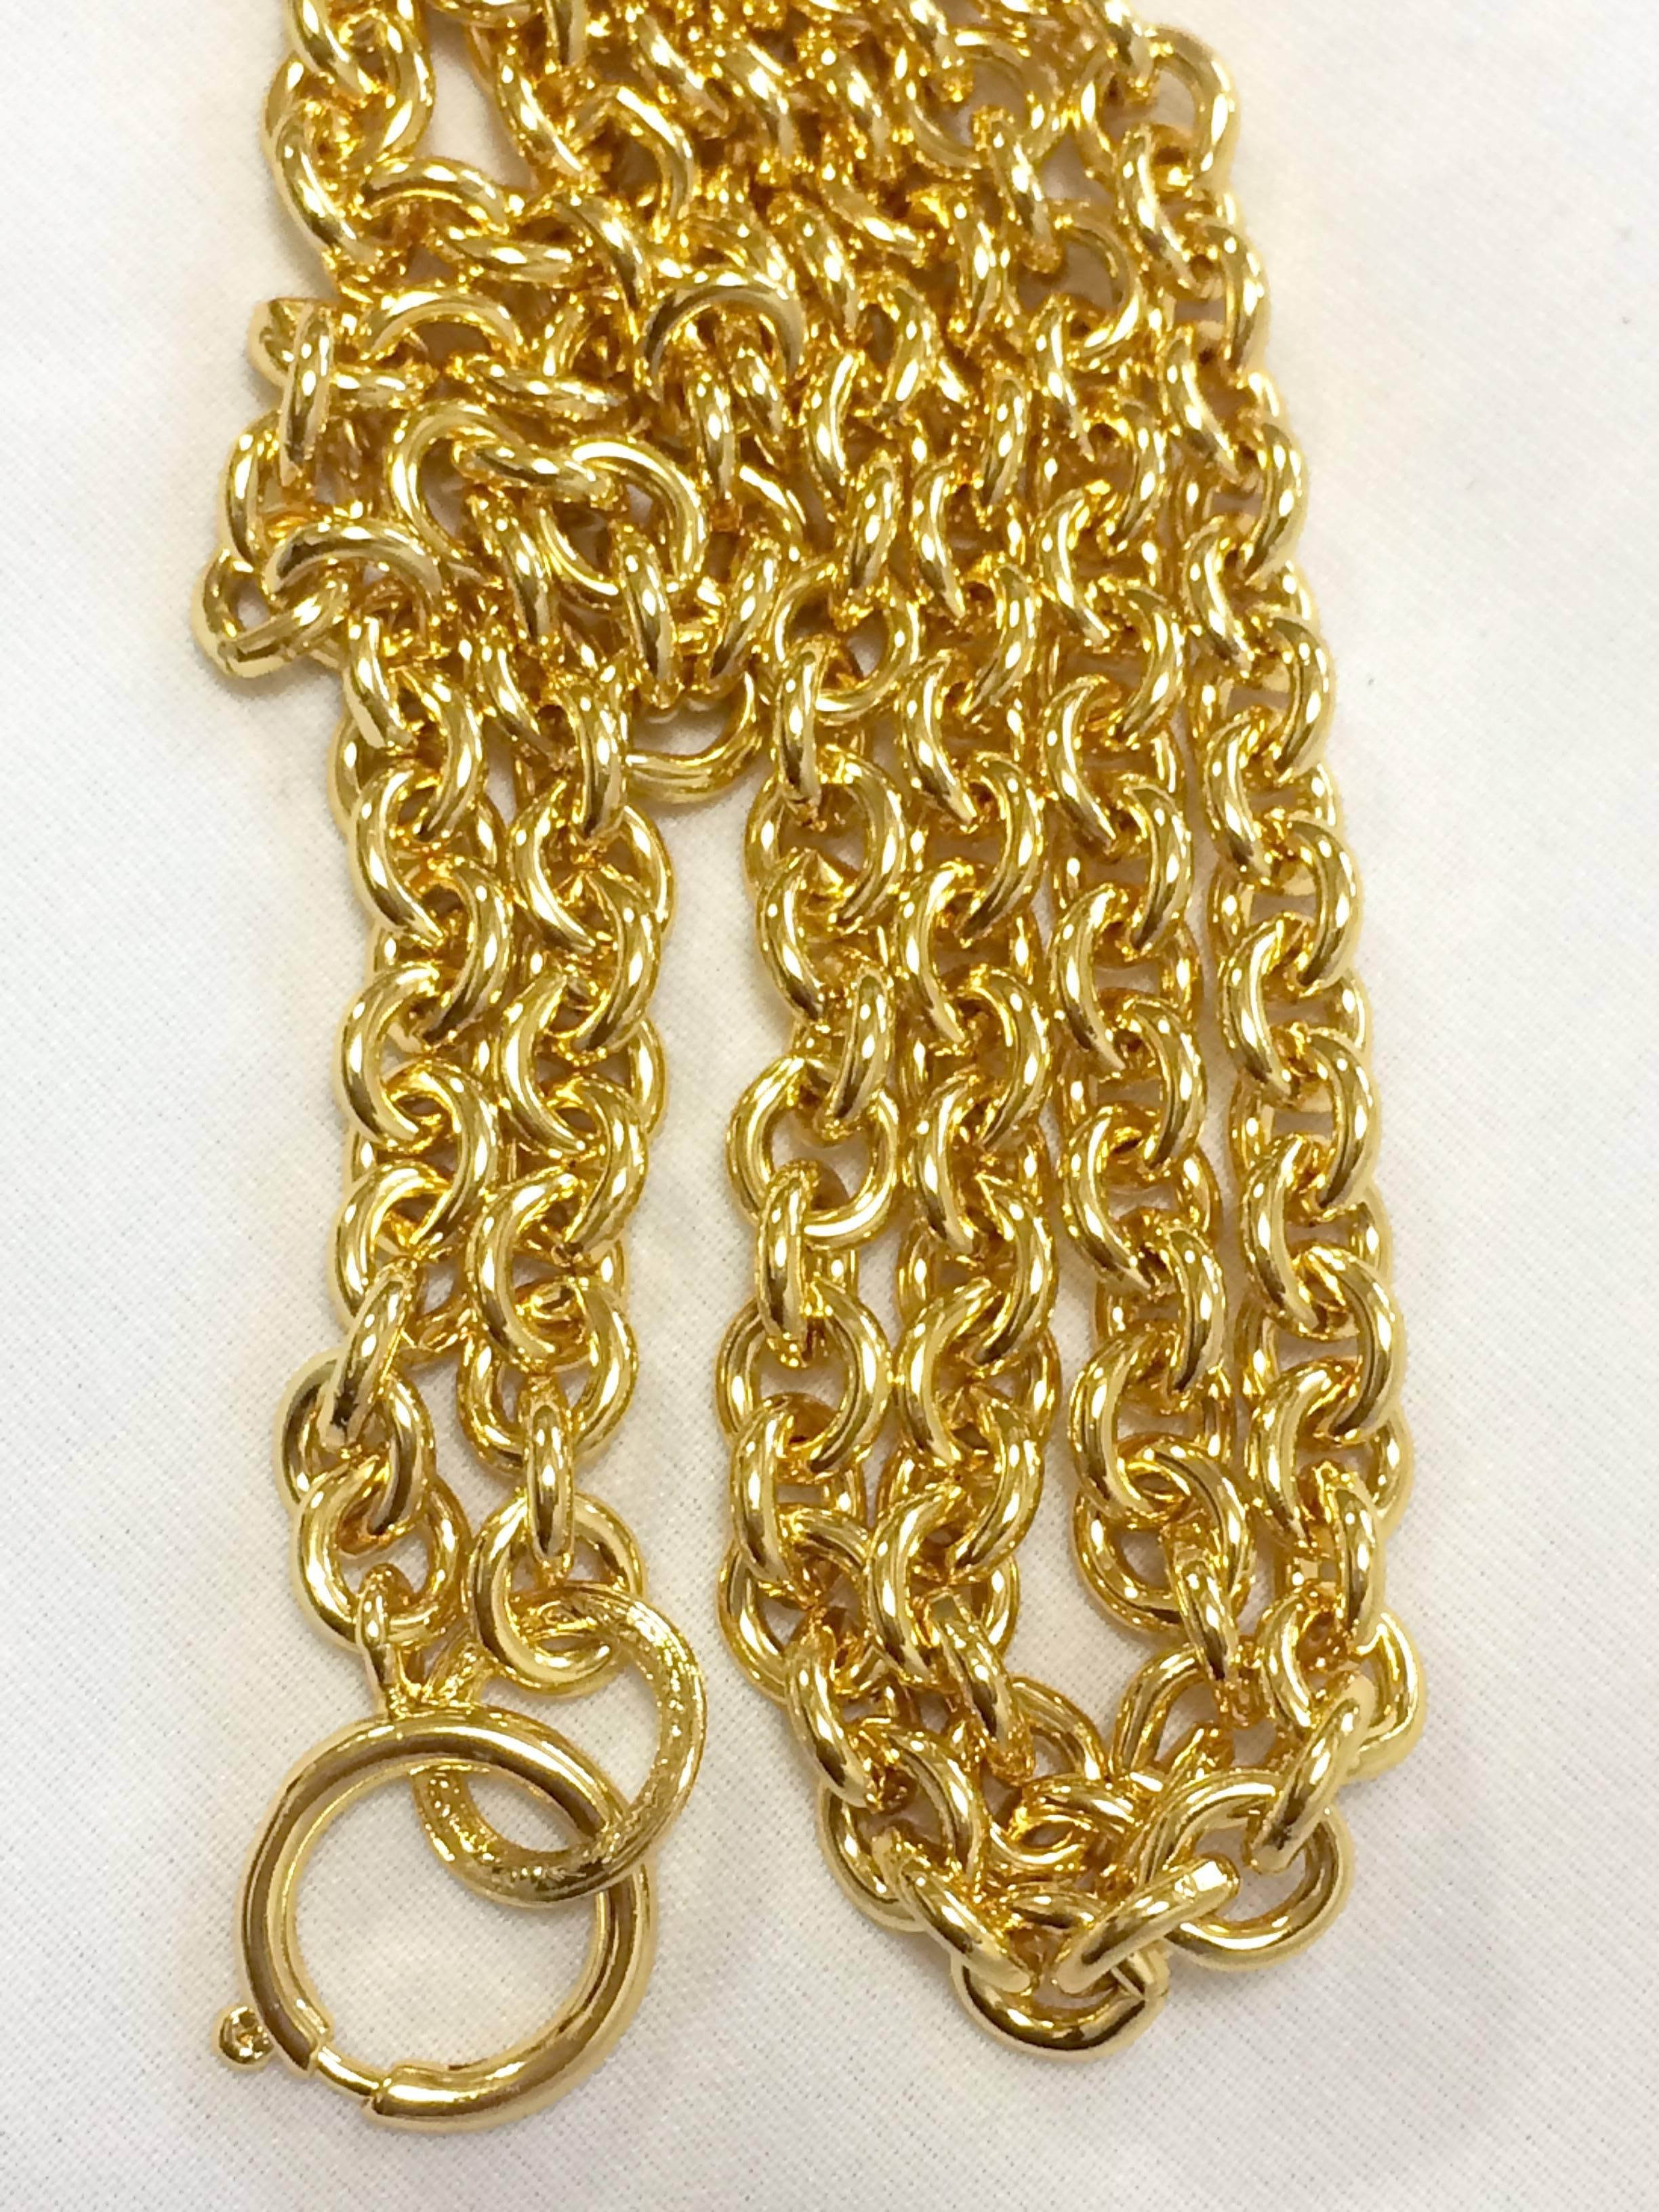 MINT. Vintage CHANEL golden long chain necklace with round coin, medal shape top 2